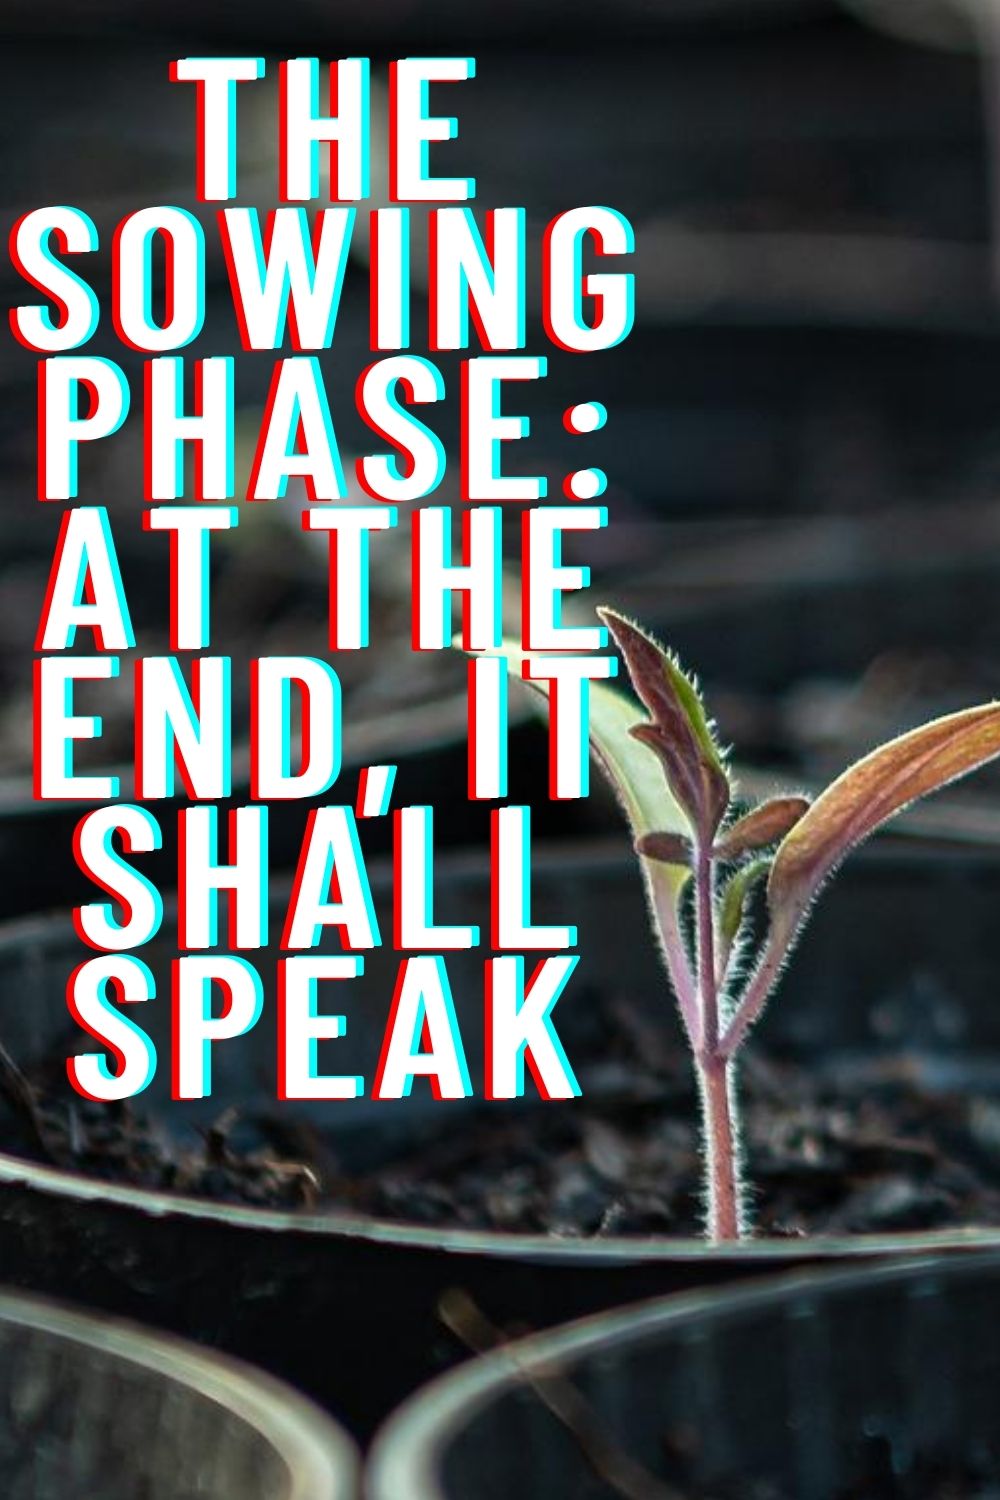 The Sowing phase: At the end, it shall speak